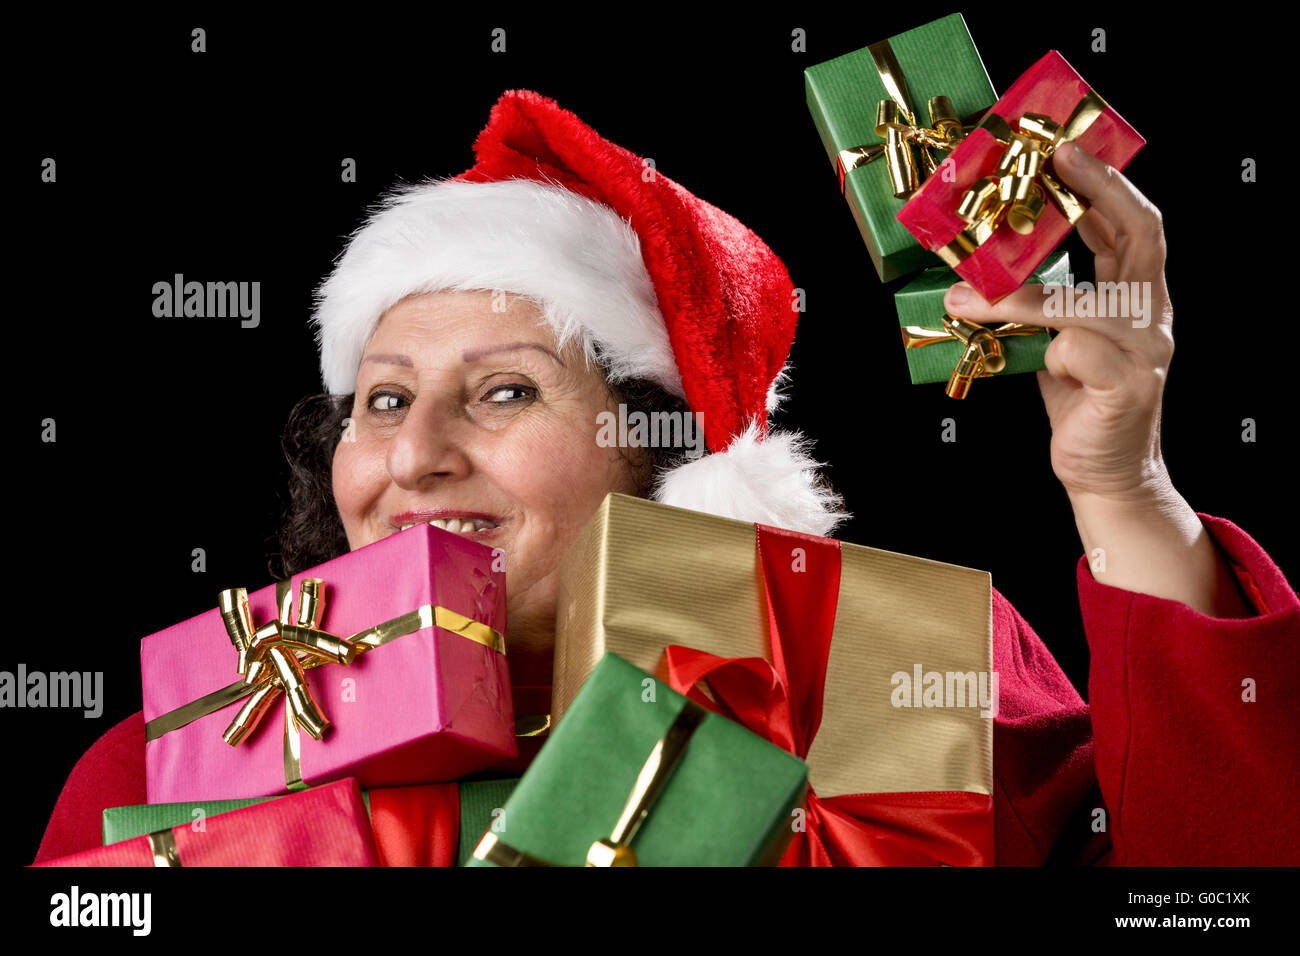 Perky Female Pensioner Presenting Wrapped Gifts Stock Photo